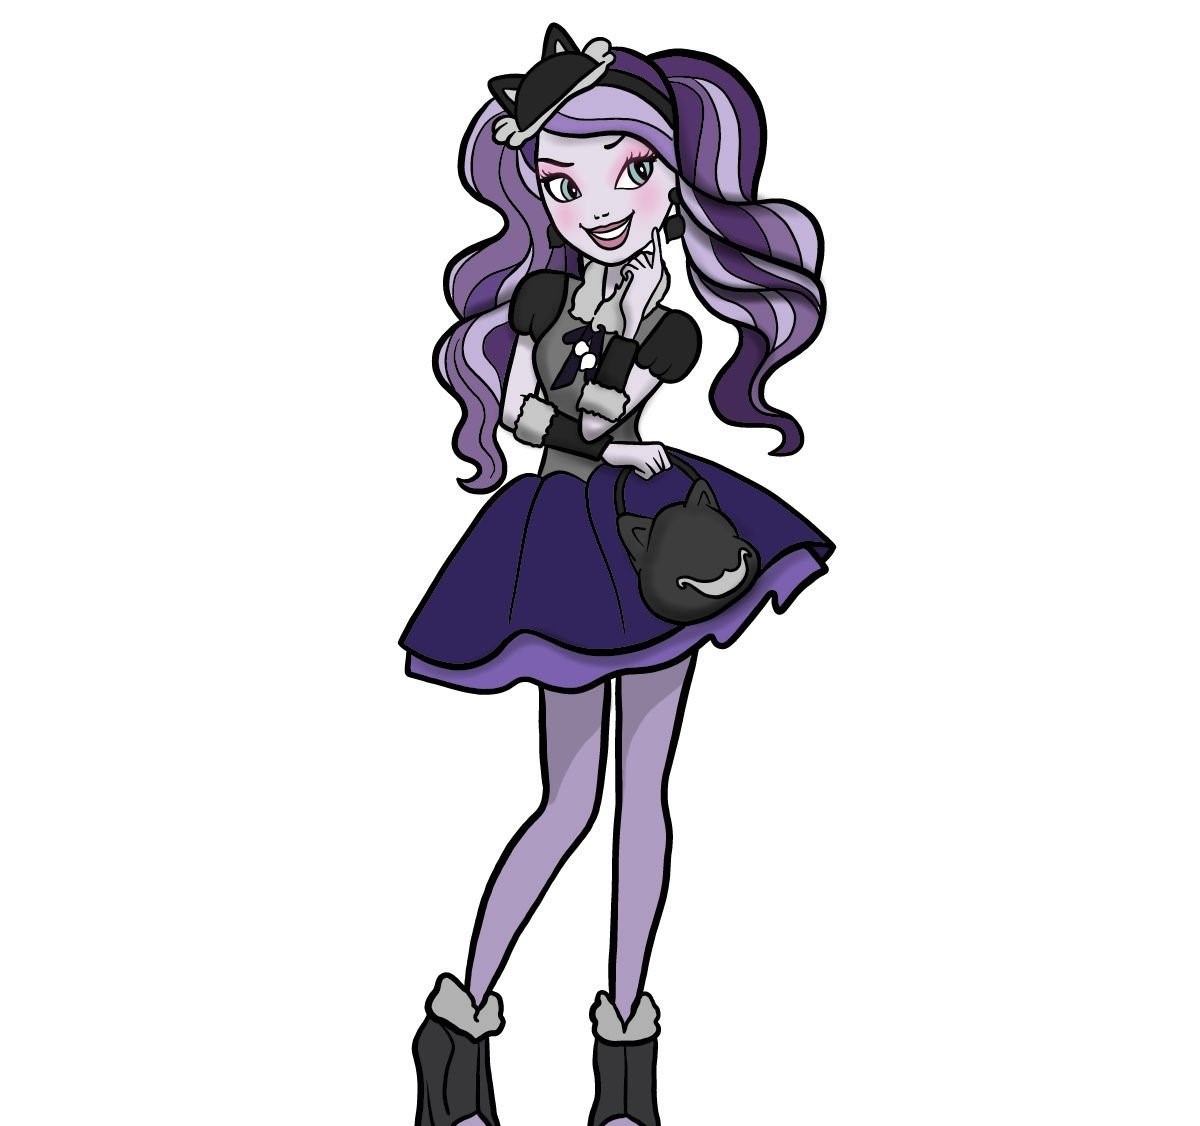 Ever after high- kitty Cheshire just for fun